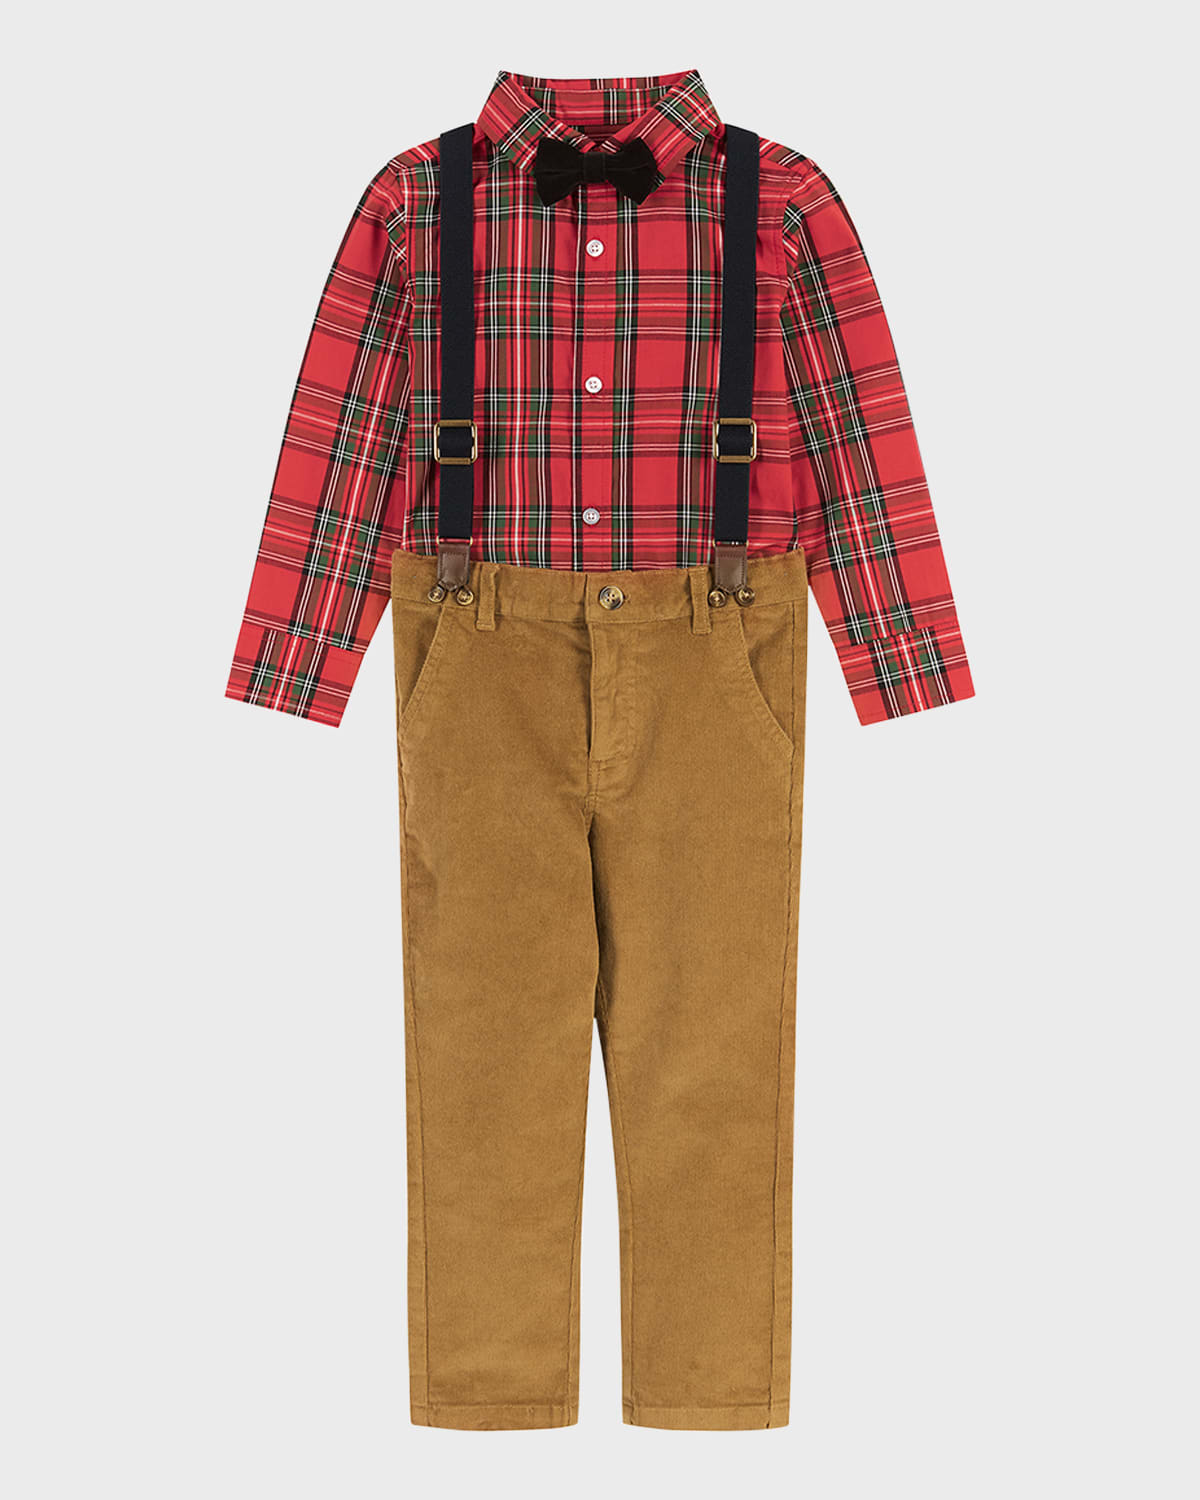 Shop Andy & Evan Boy's Plaid Flannel Button Down W/ Suspenders Set In Red Plaid